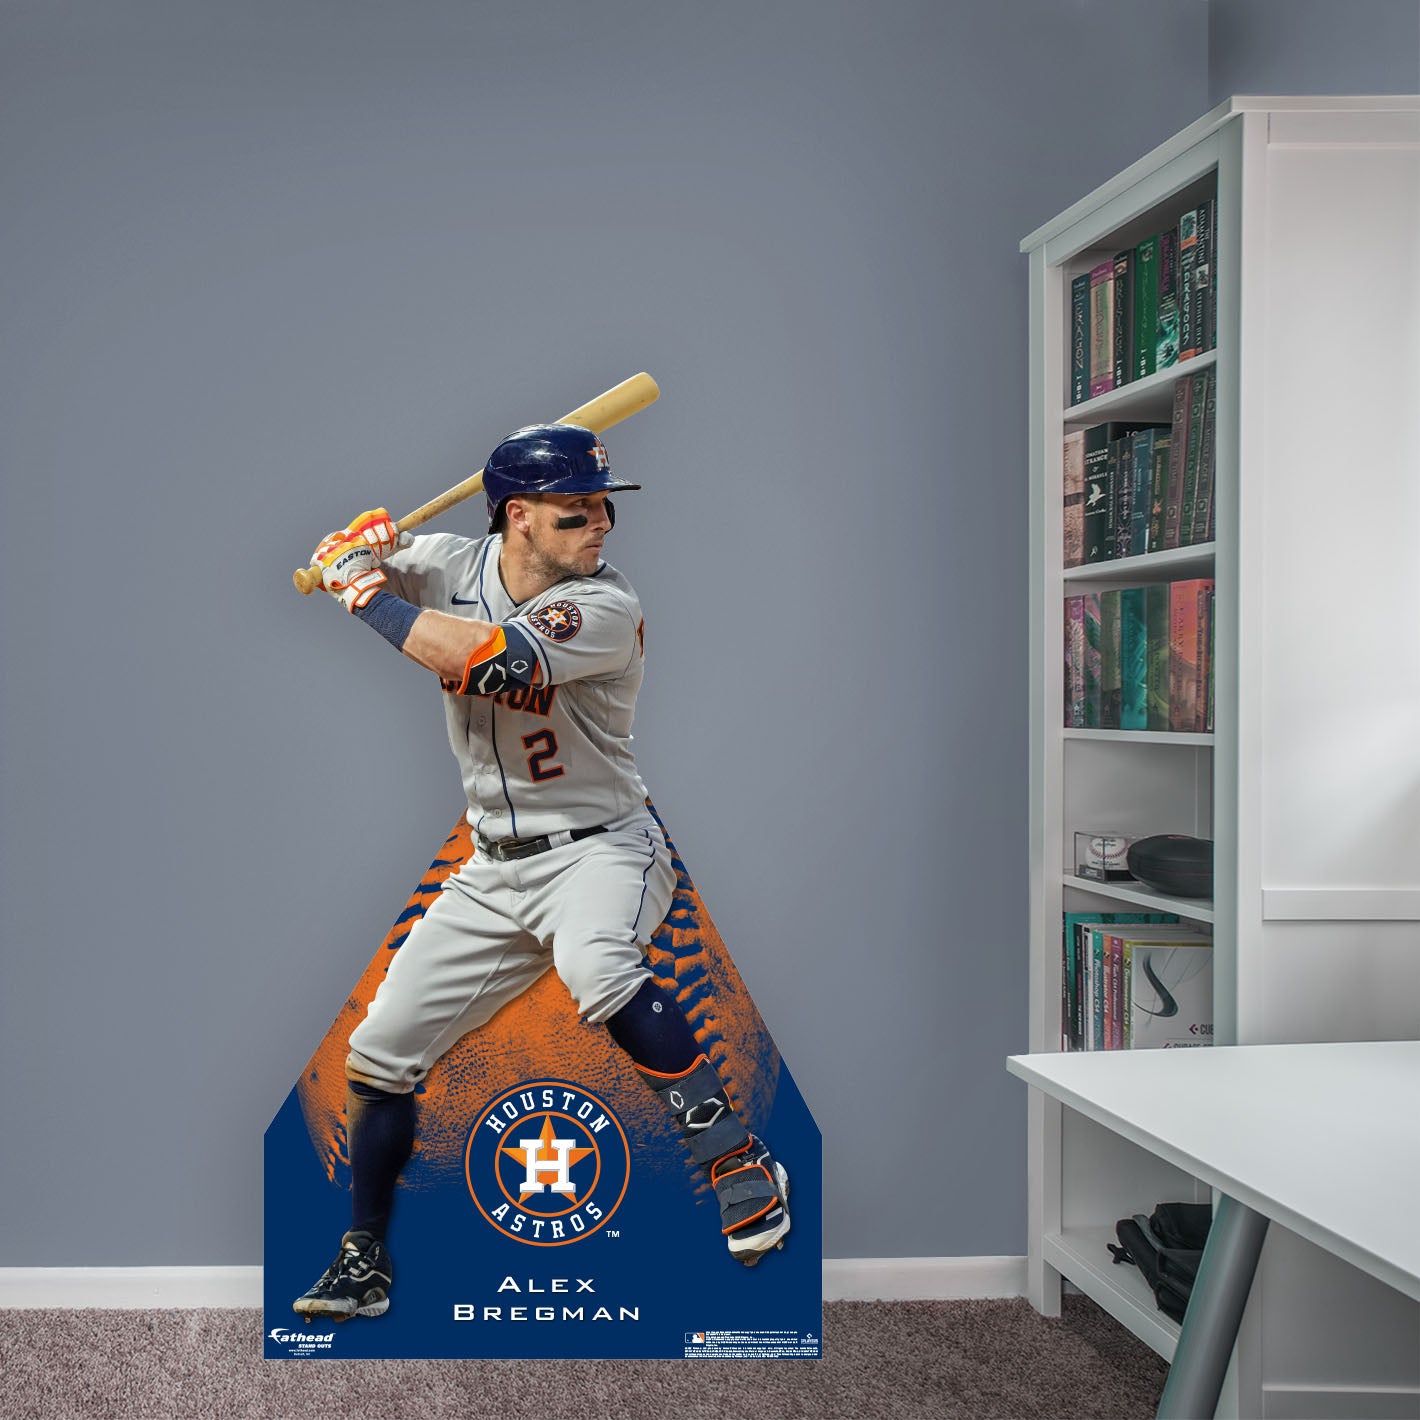 Houston Astros: Alex Bregman 2022  Life-Size   Foam Core Cutout  - Officially Licensed MLB    Stand Out